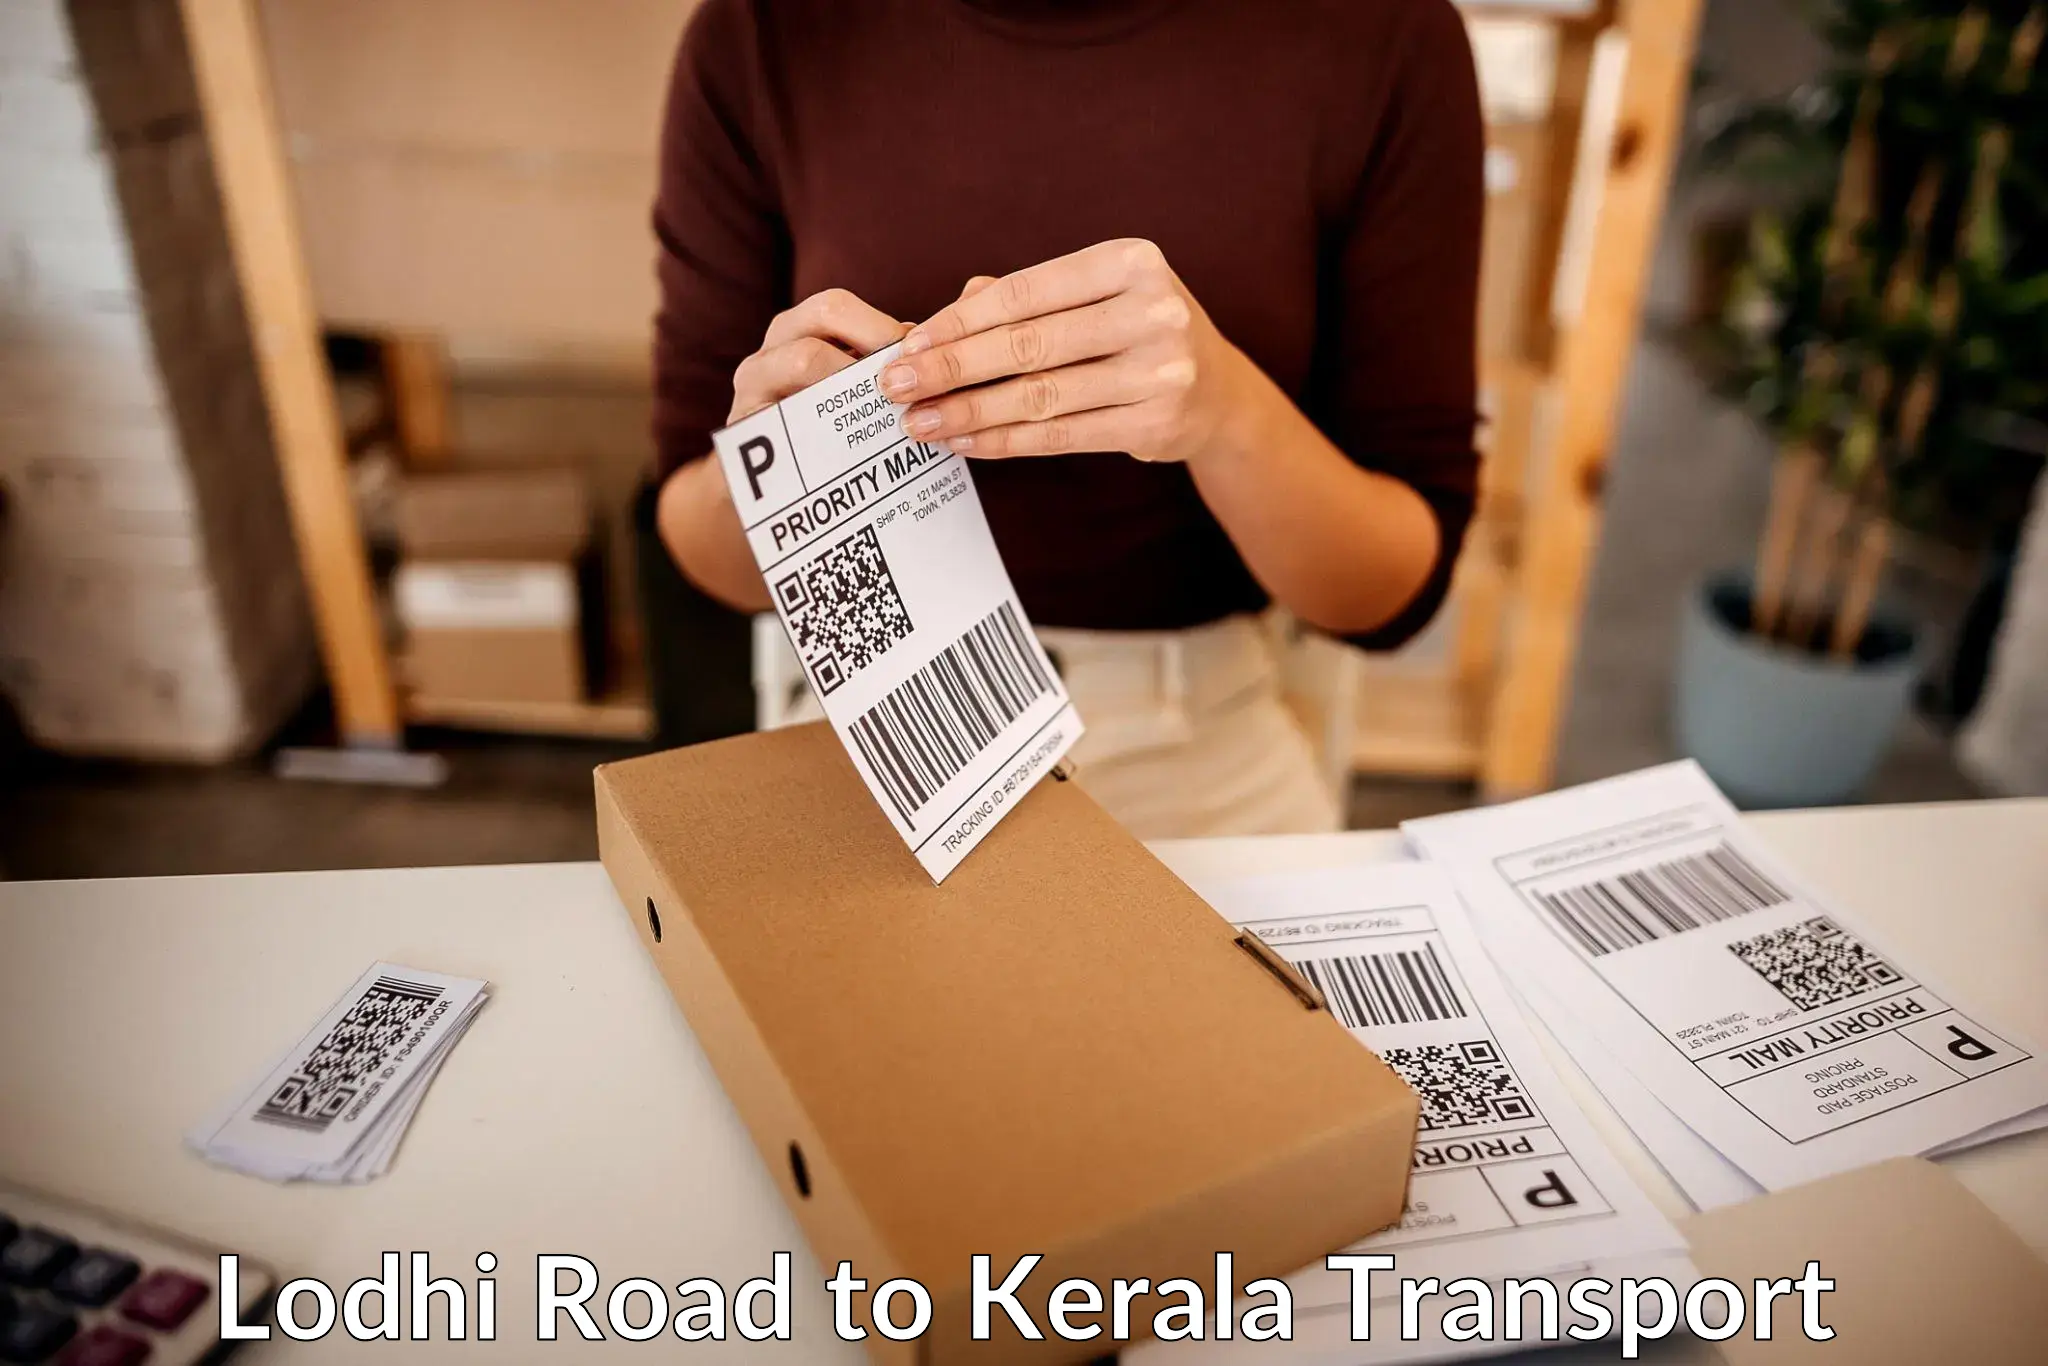 Commercial transport service Lodhi Road to Kuthumkal